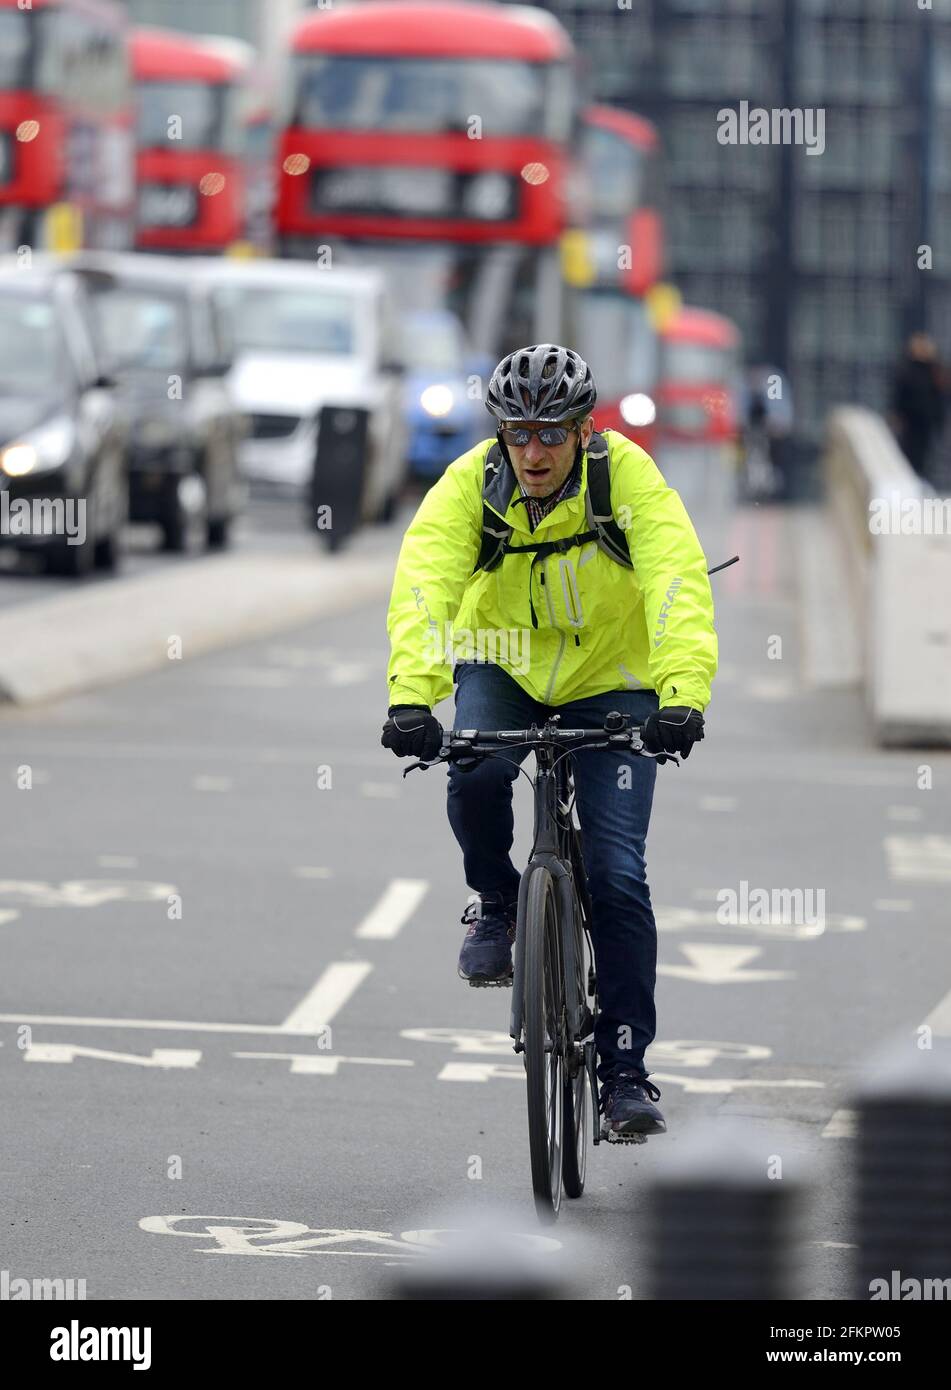 London, England, UK. Cyclist on Westminster Bridge, in the cycle lane Stock Photo